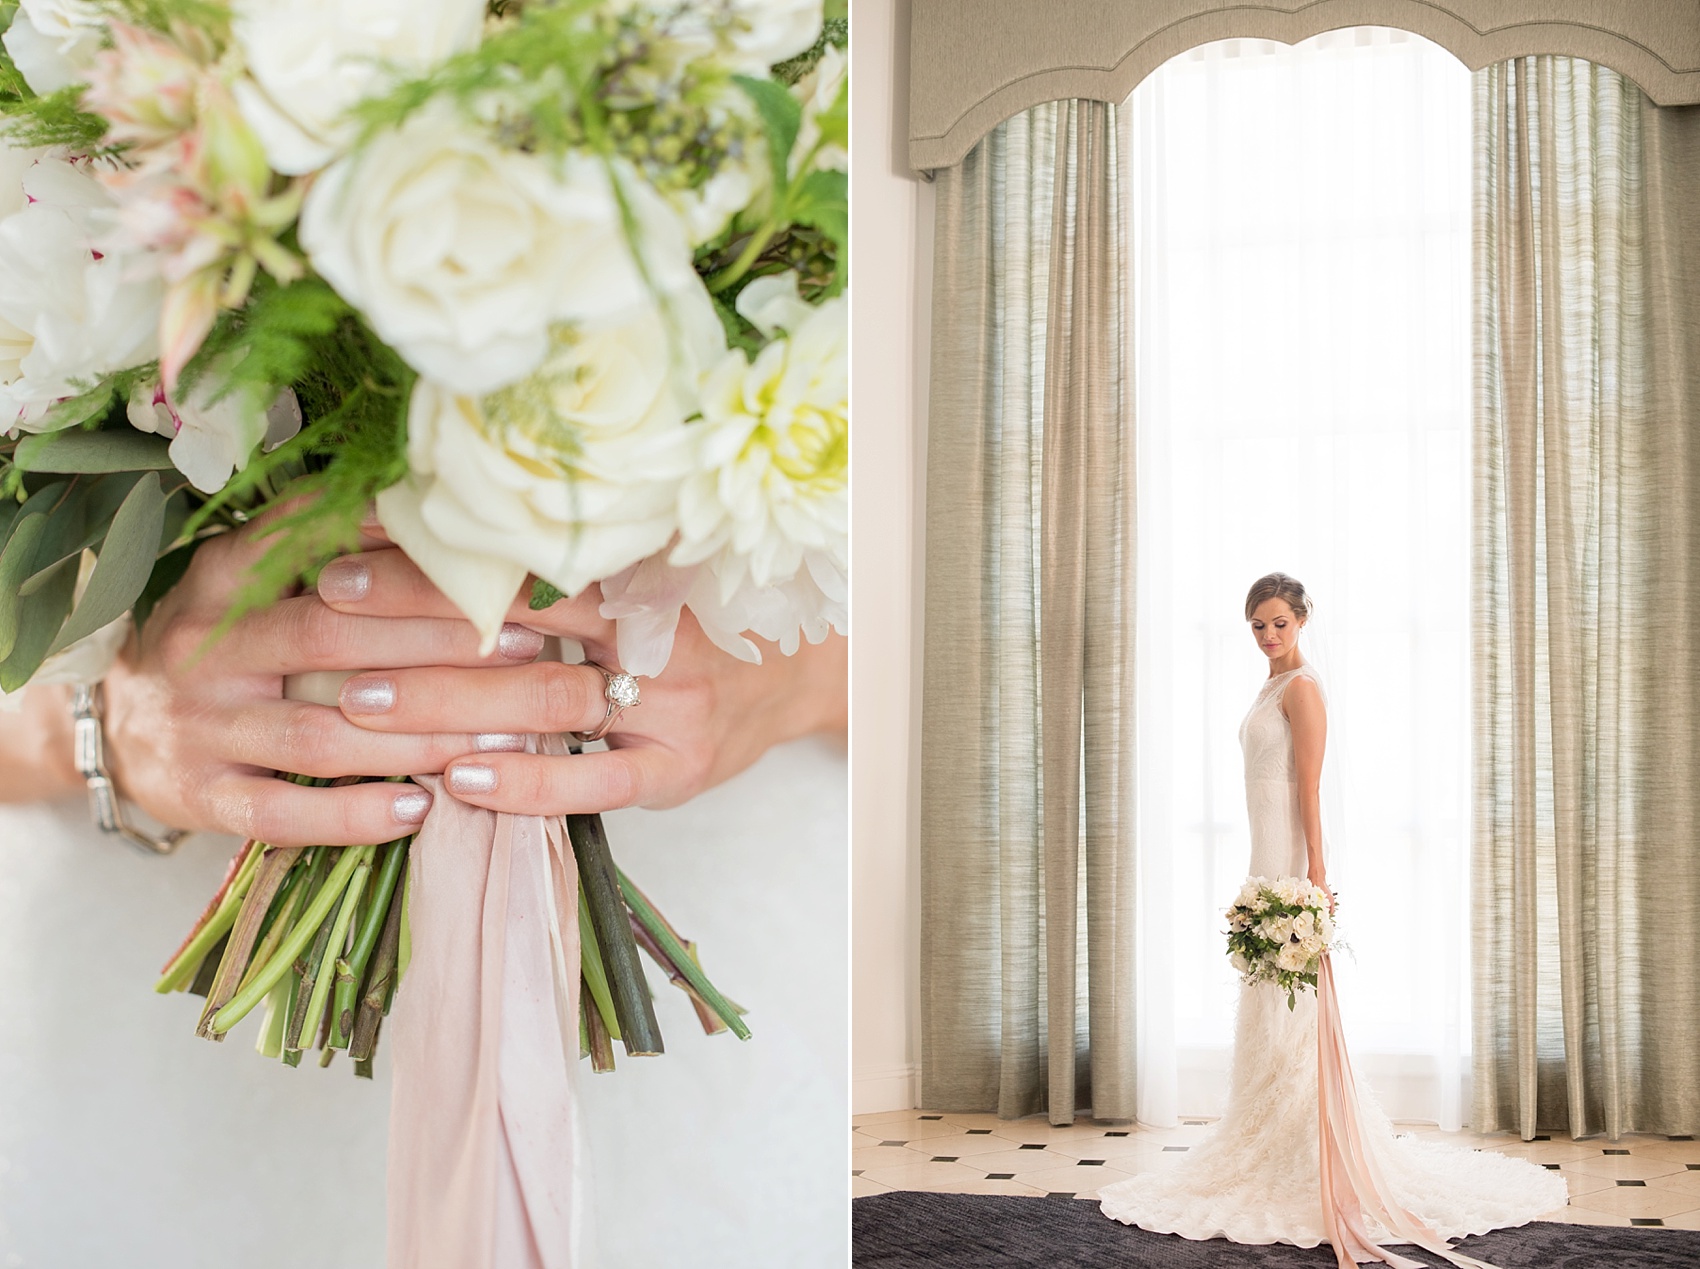 Pearl River Hilton bridal portrait wedding photos. Bouquet by Full Aperture Floral. Images by Mikkel Paige Photography, NYC wedding photographer.